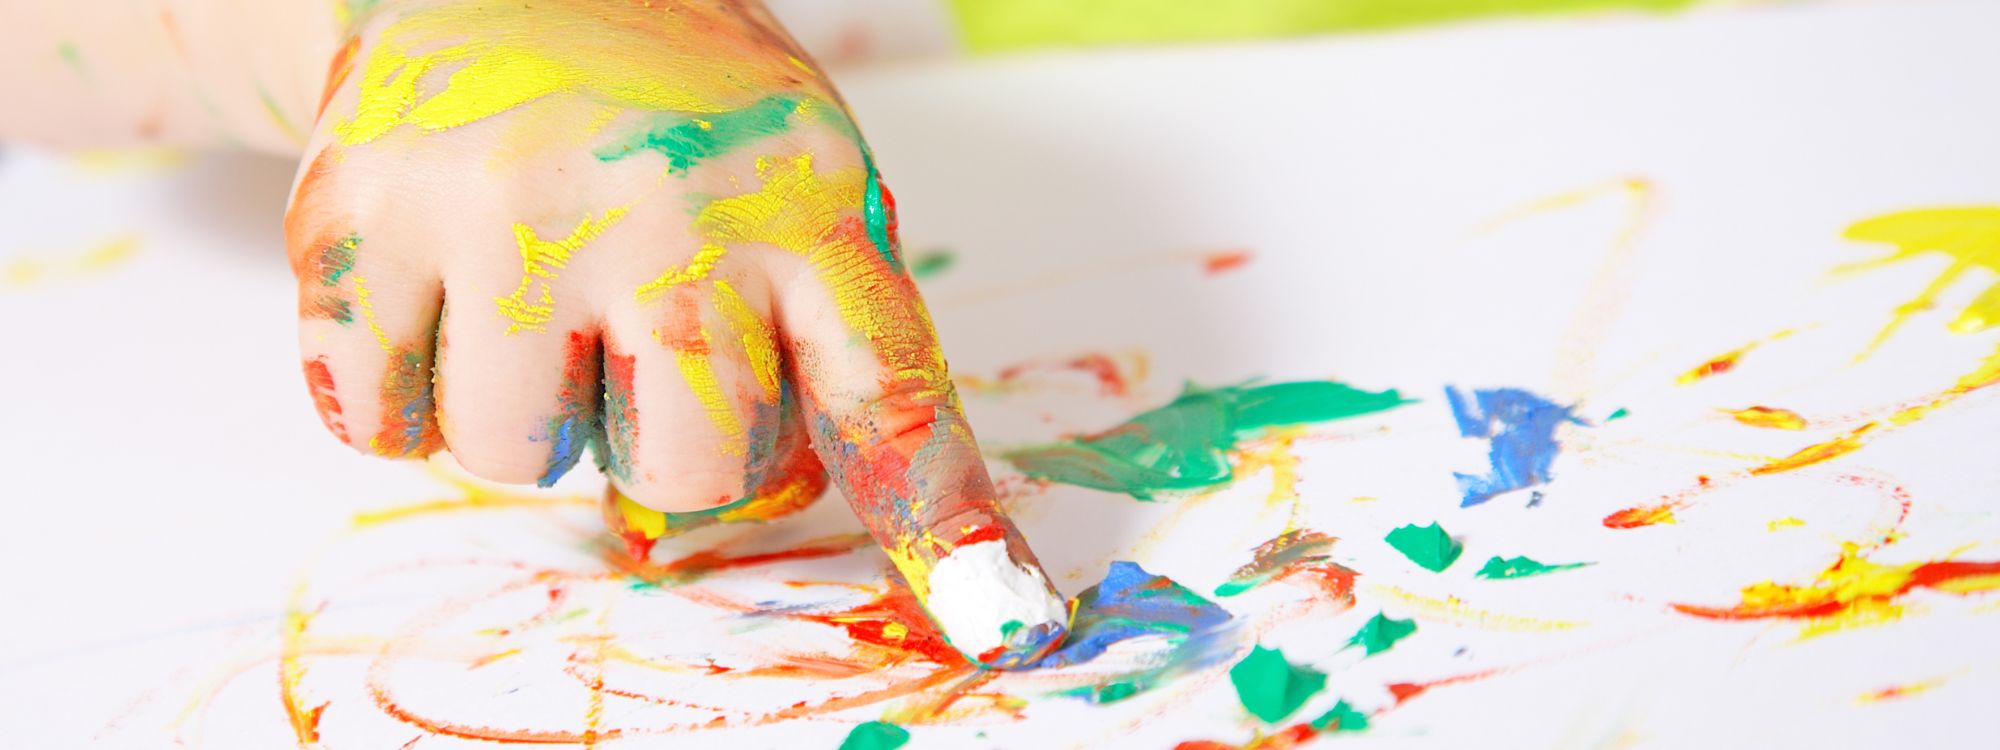 finger painting to increase creativity